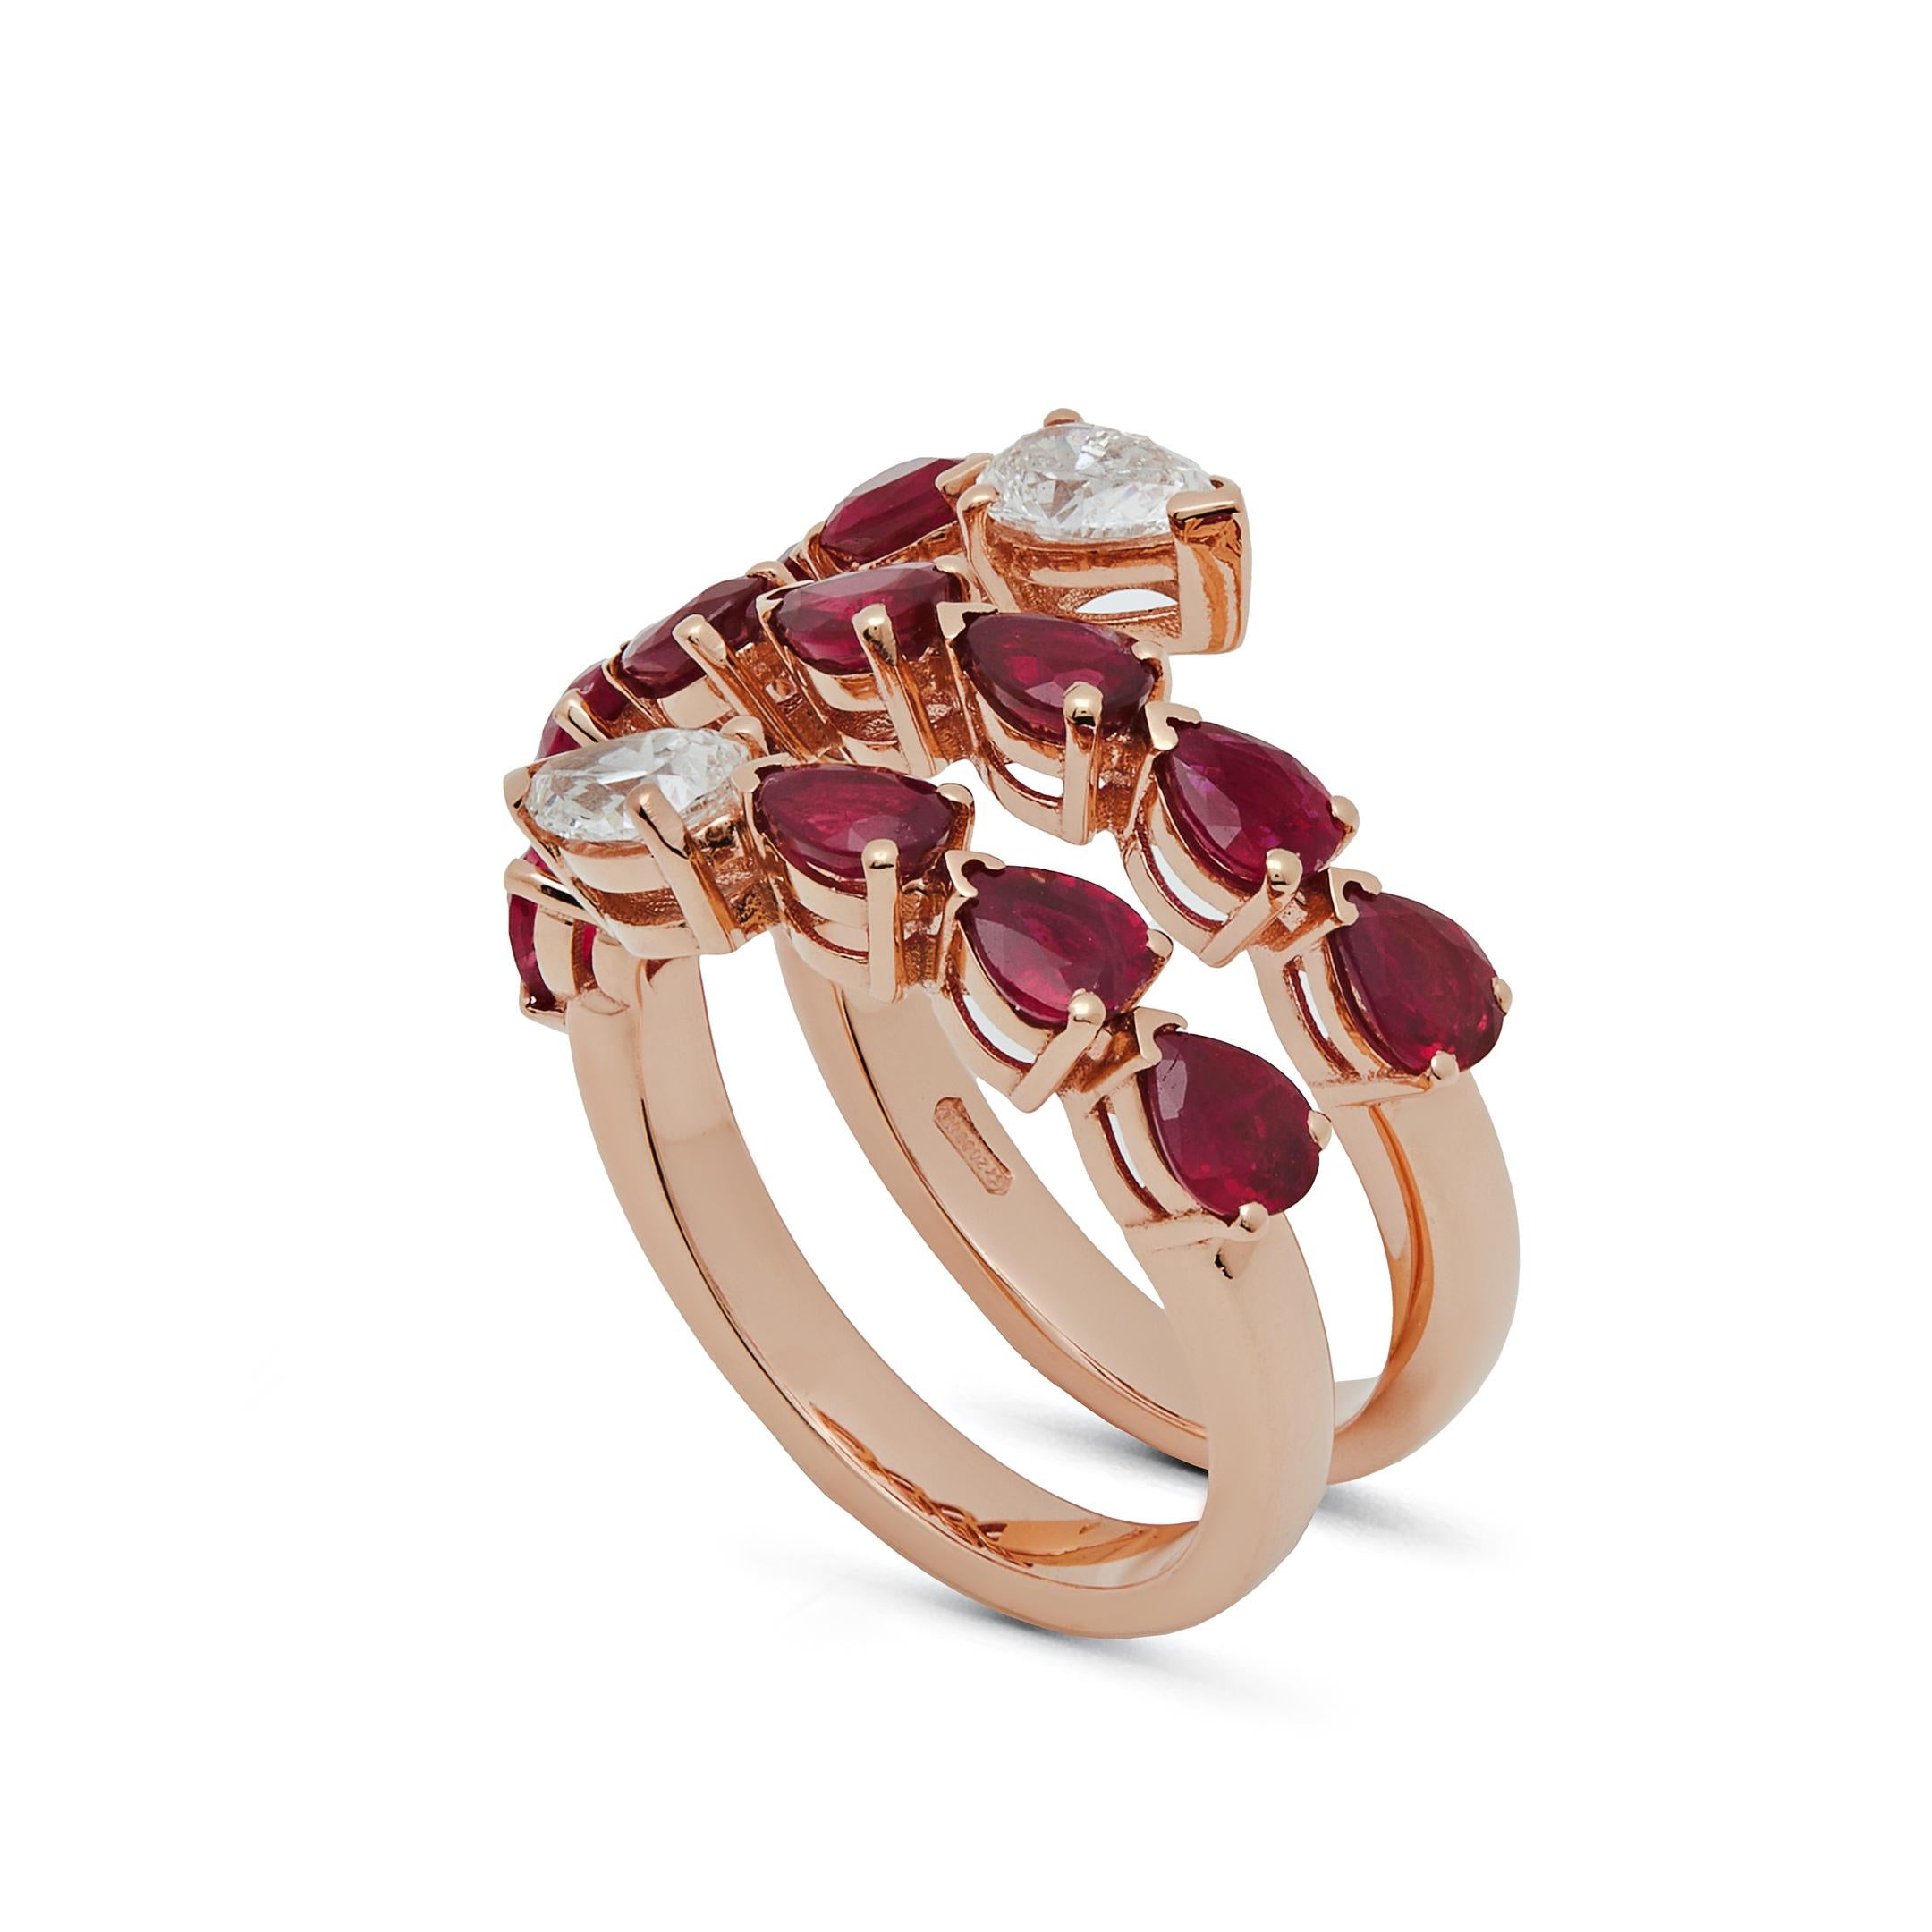 Three rows of shining gems comprise the exuberant Ruby and Diamond Twist Ring. Sensual pear-shaped rubies contrast with classic white diamonds, all set in 18-karat rose gold. Wear it with denim, heels and your favorite Hermés bag for the perfect,